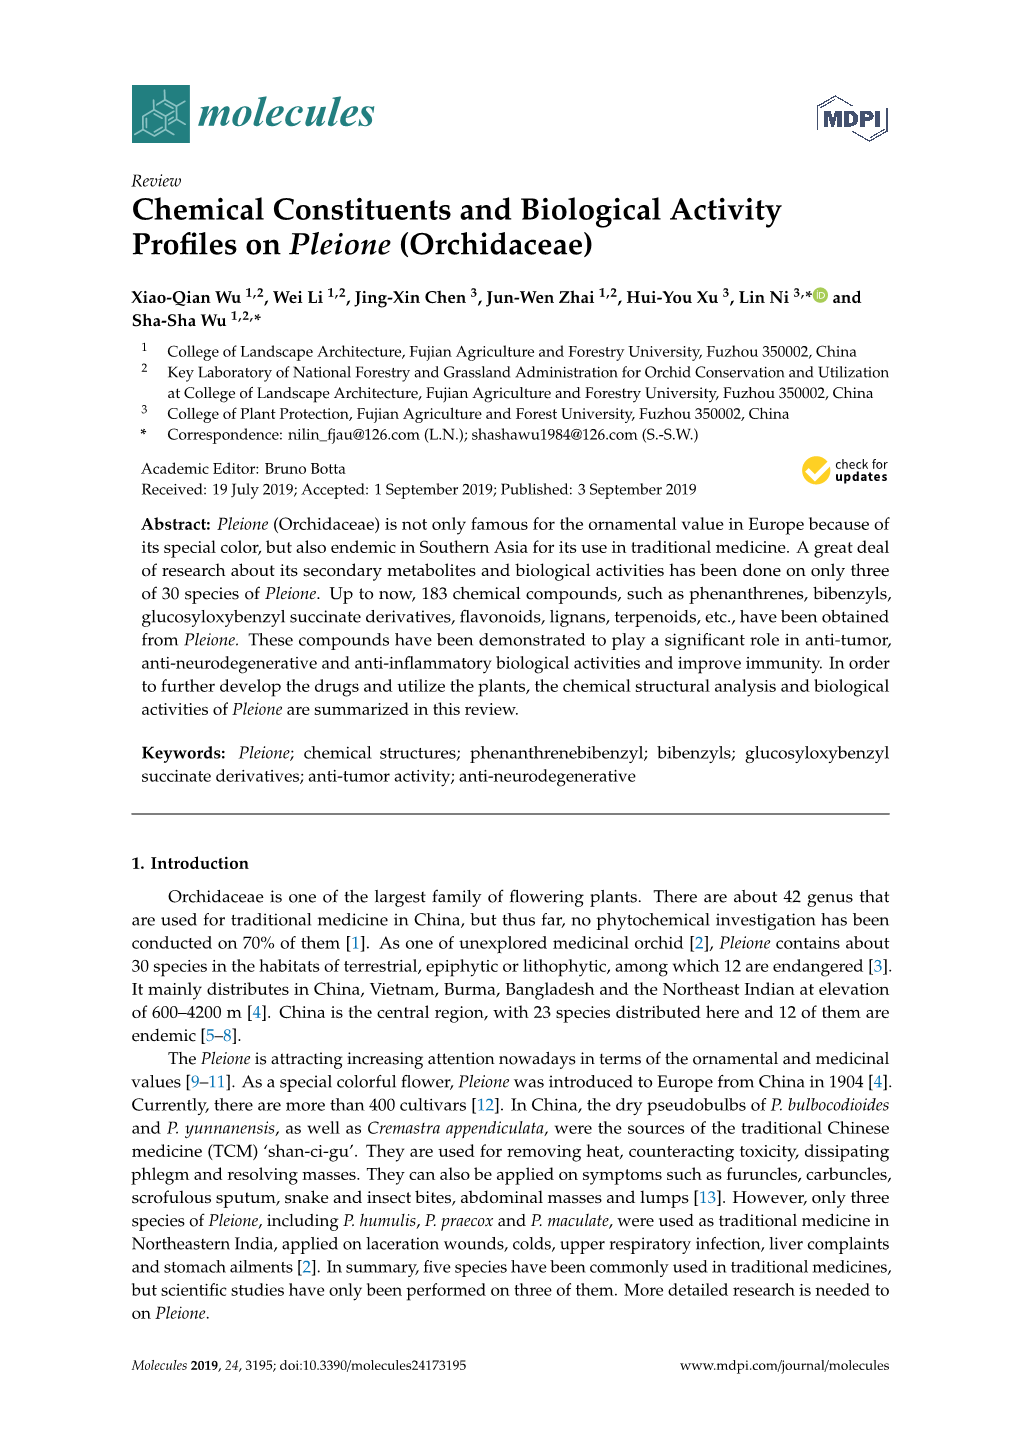 Chemical Constituents and Biological Activity Profiles on Pleione (Orchidaceae)